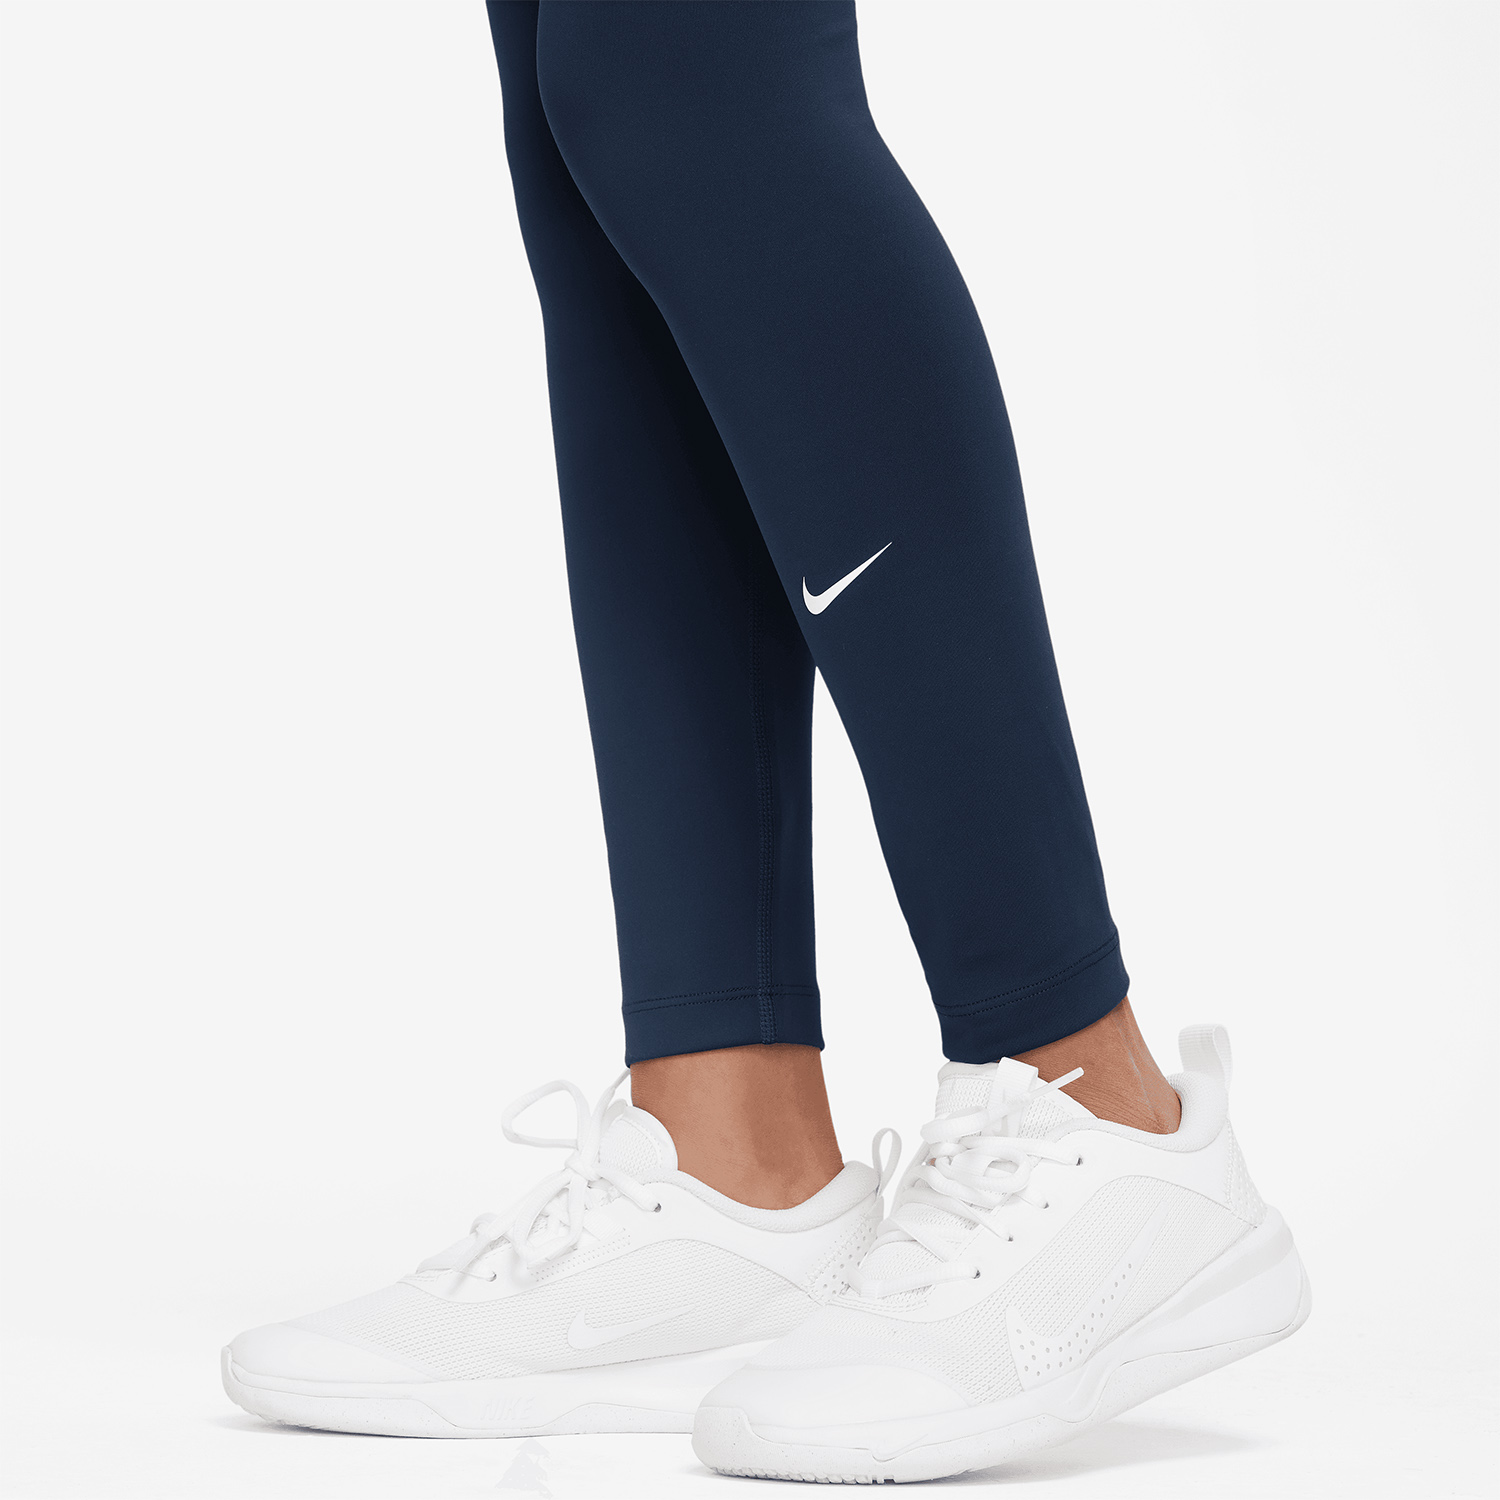 Nike Dri-FIT One Tights Girl - Midnight Navy/White